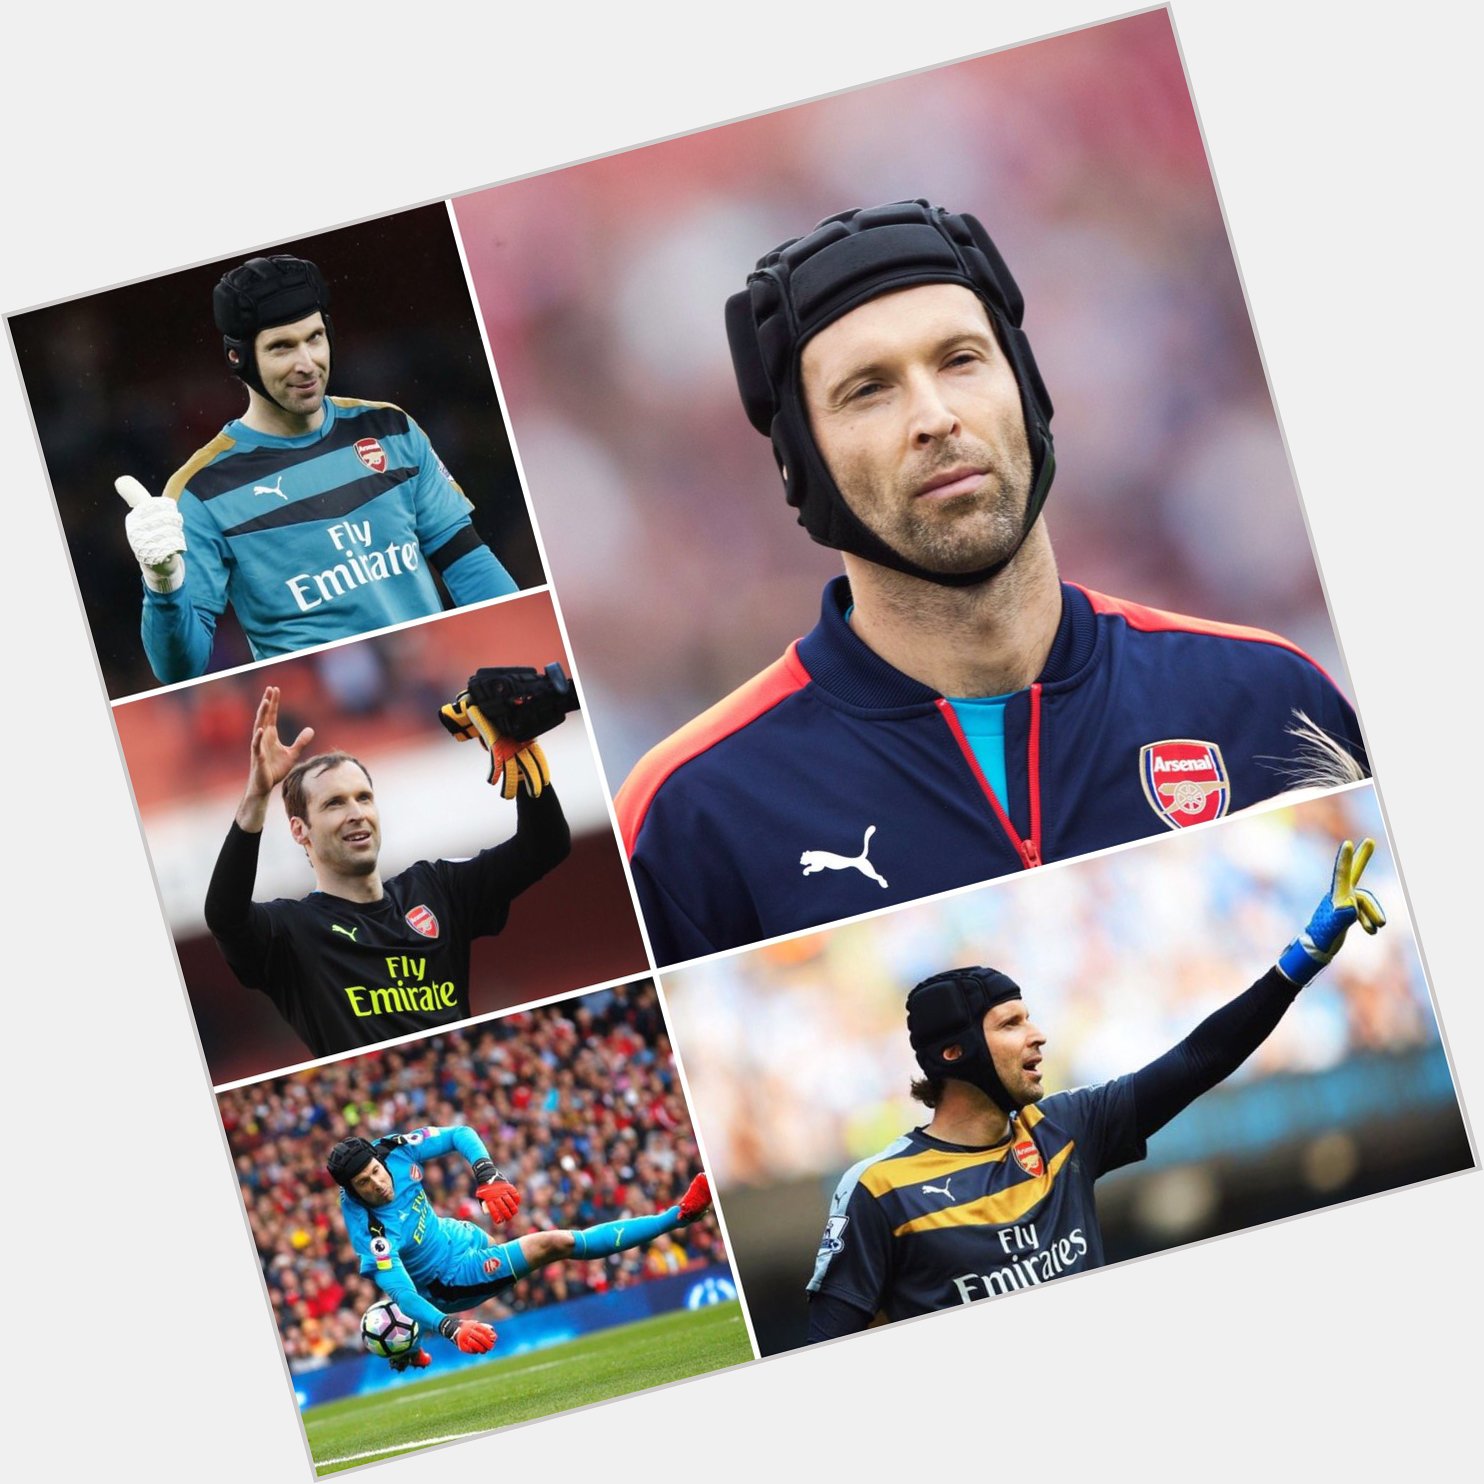 35 years old 77 appearances   34 clean sheets  Happy birthday to our Czech keeper, Petr ech! 